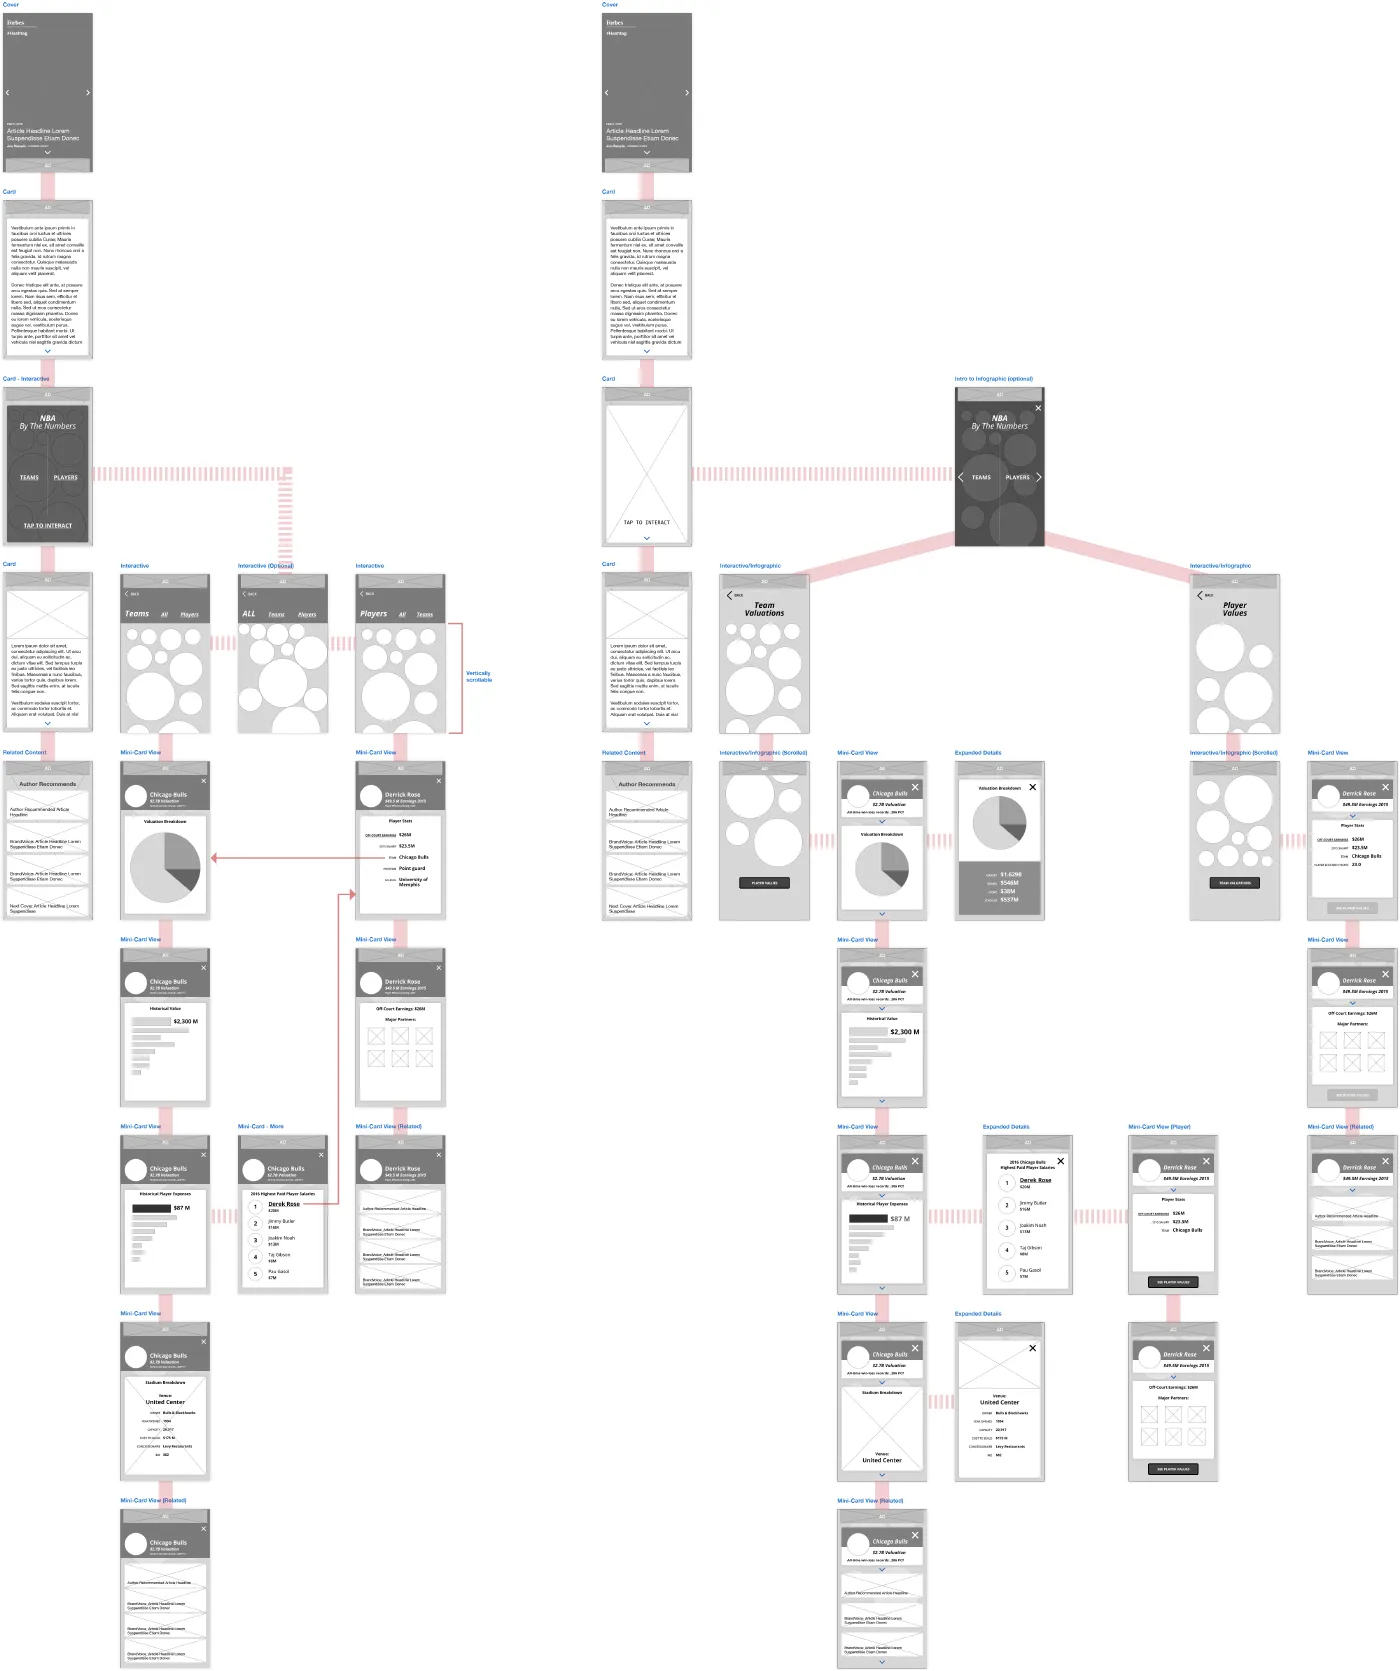 Wireframe of the userflow